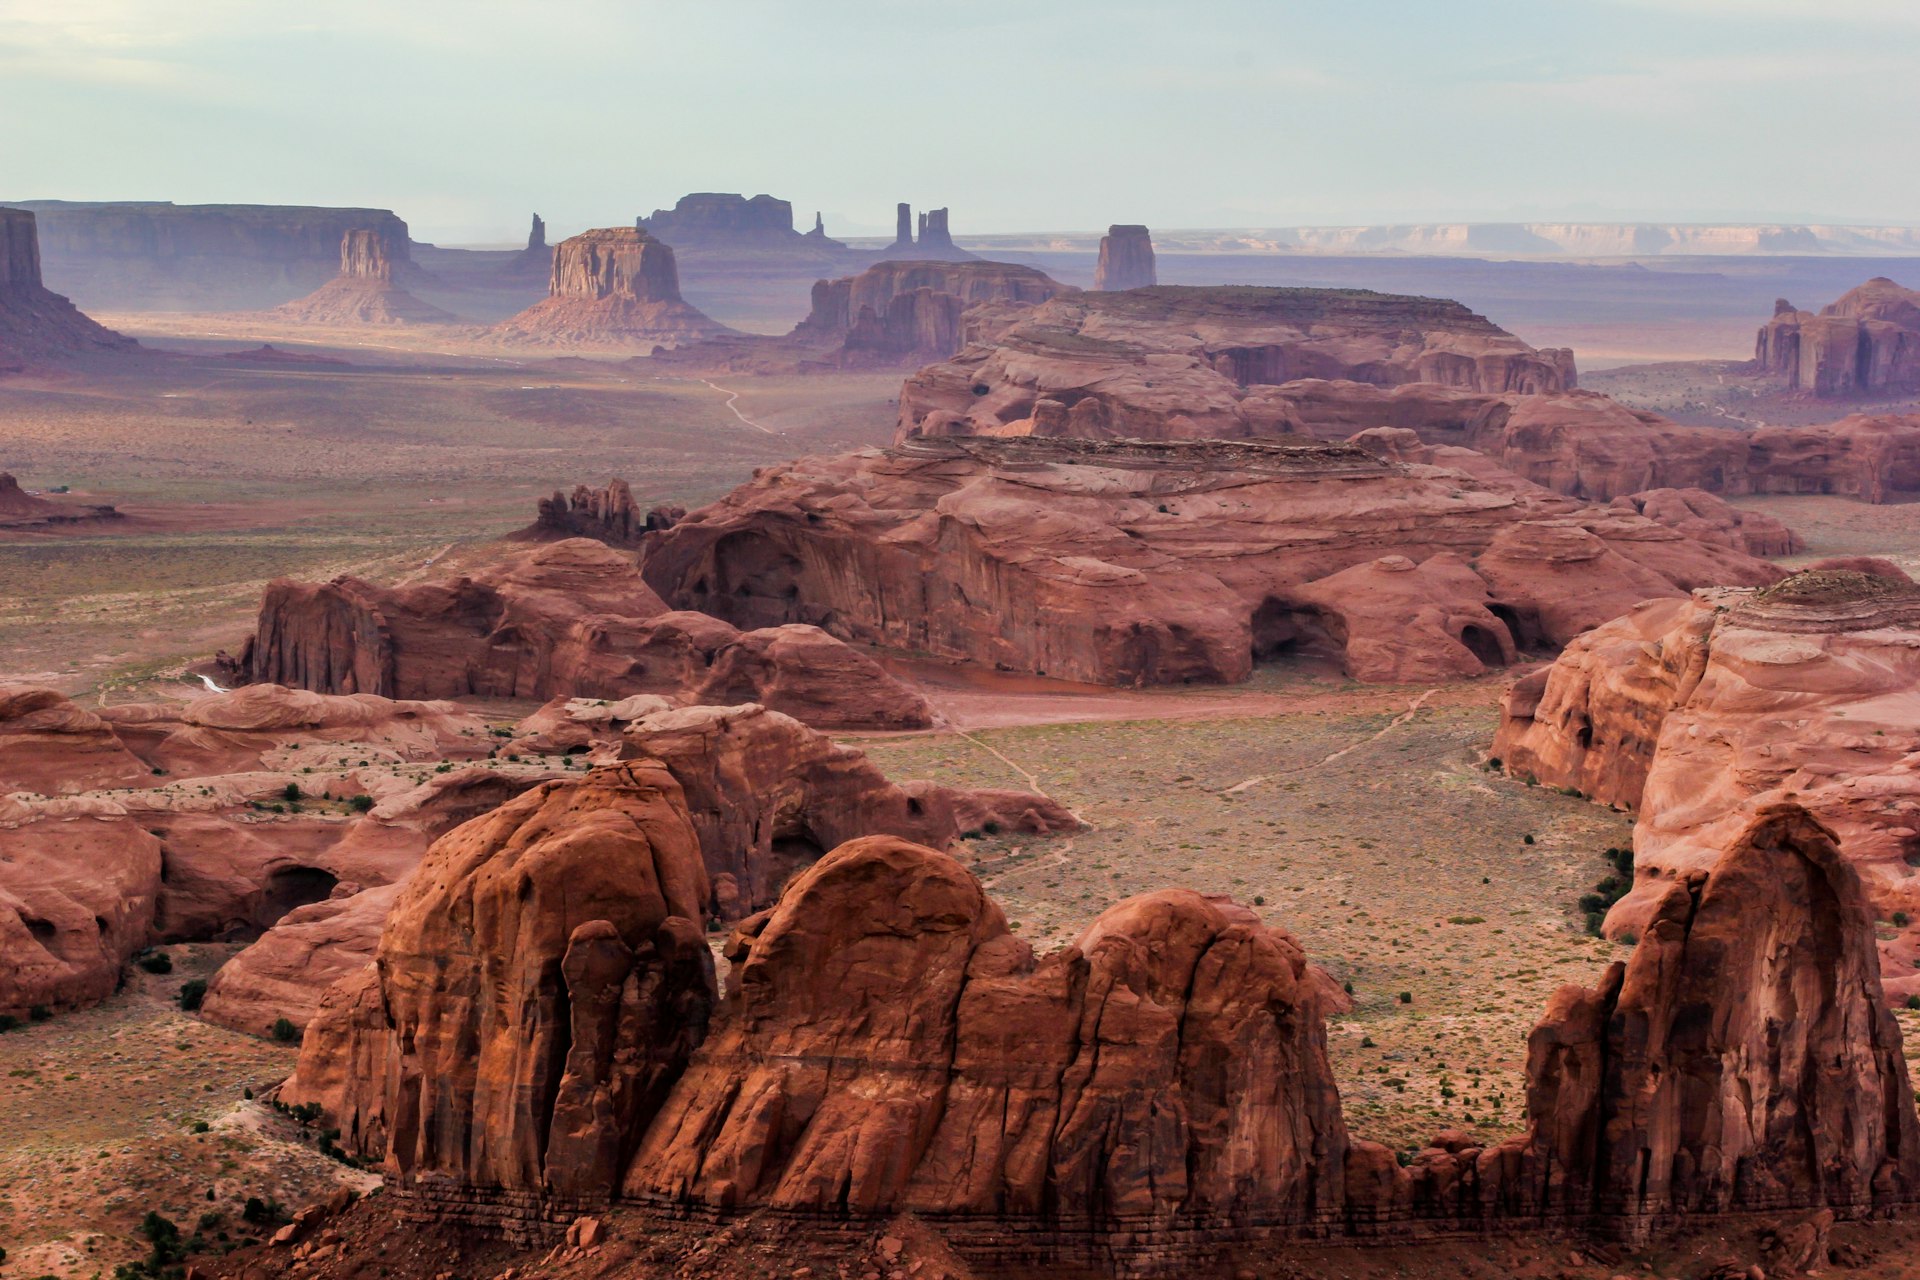 500px Photo ID: 122587399 - Monument Valley from the Hunt's Mesa, unique and remote pov.